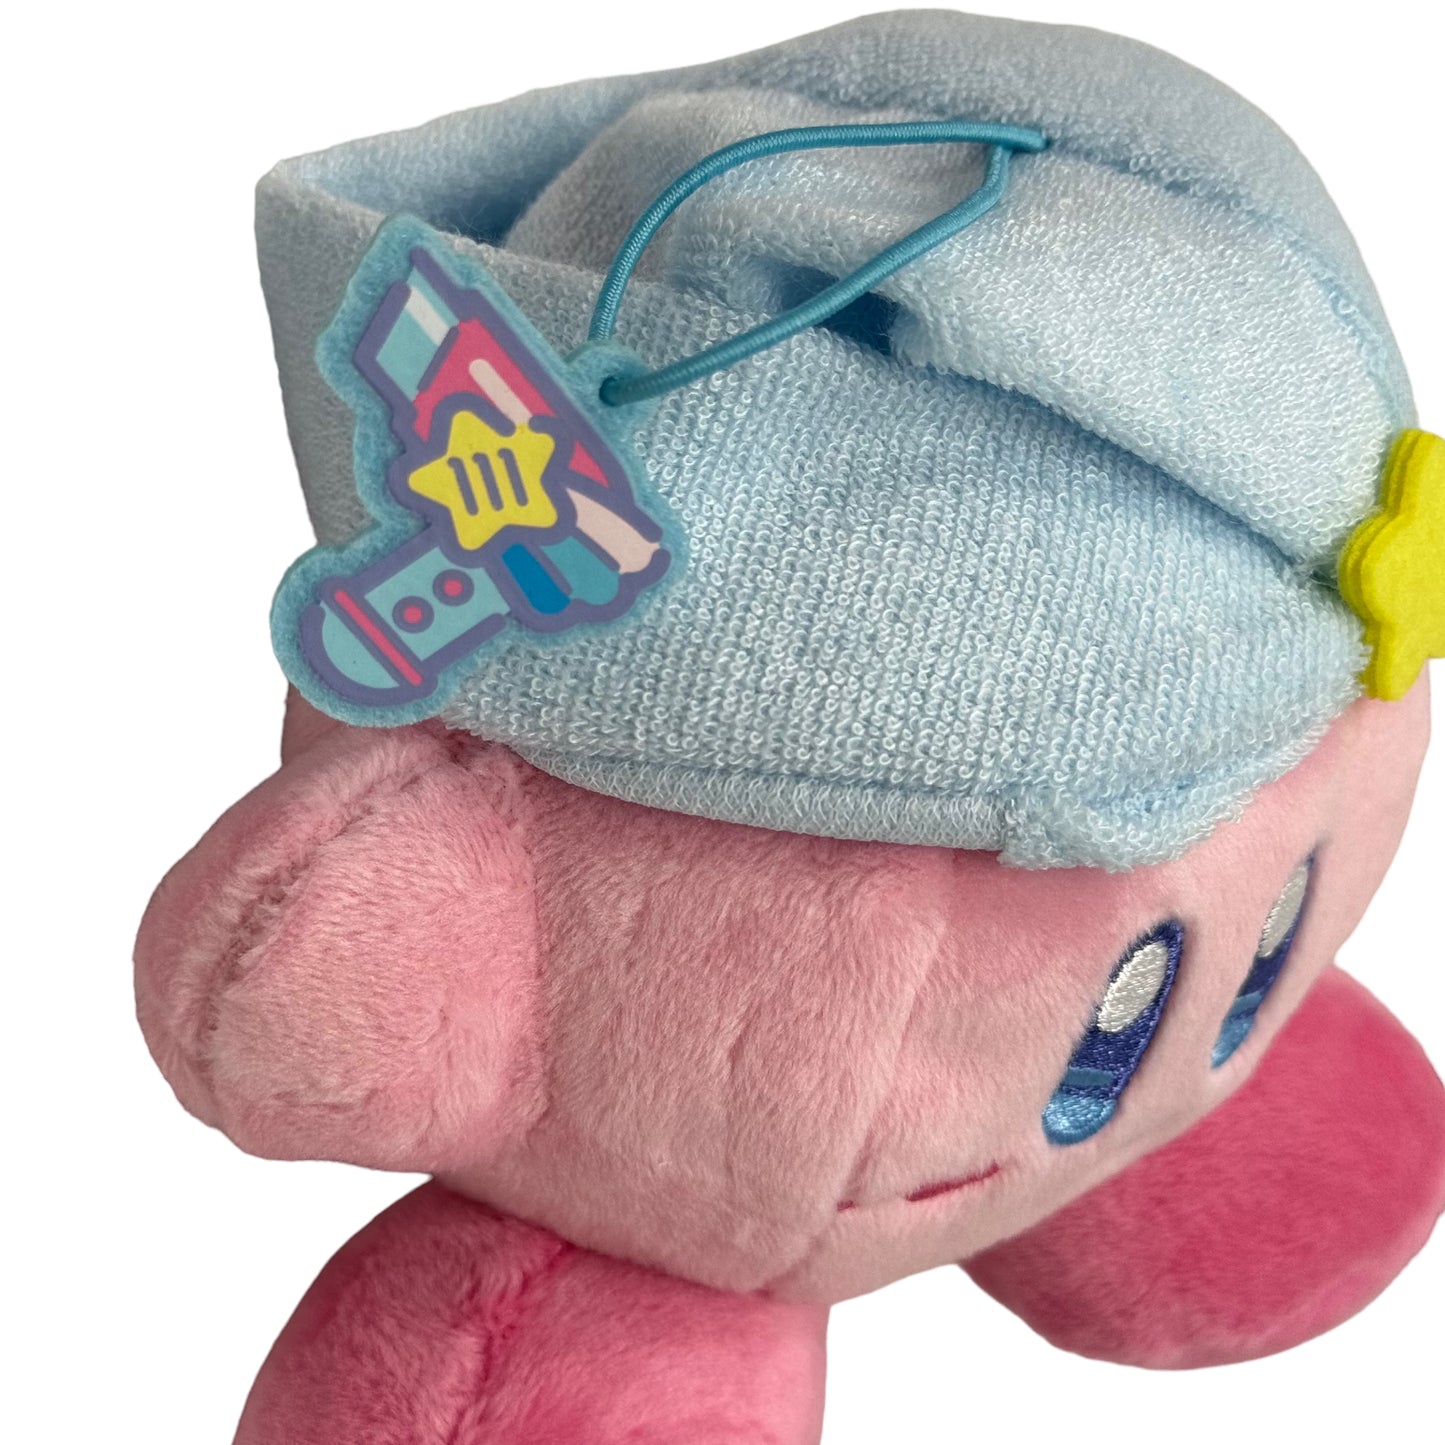 KIRBY SUPER STAR DRYER TIME Plush - Sweet Dreams 2023 (NEW) Japan Exclusive Toy